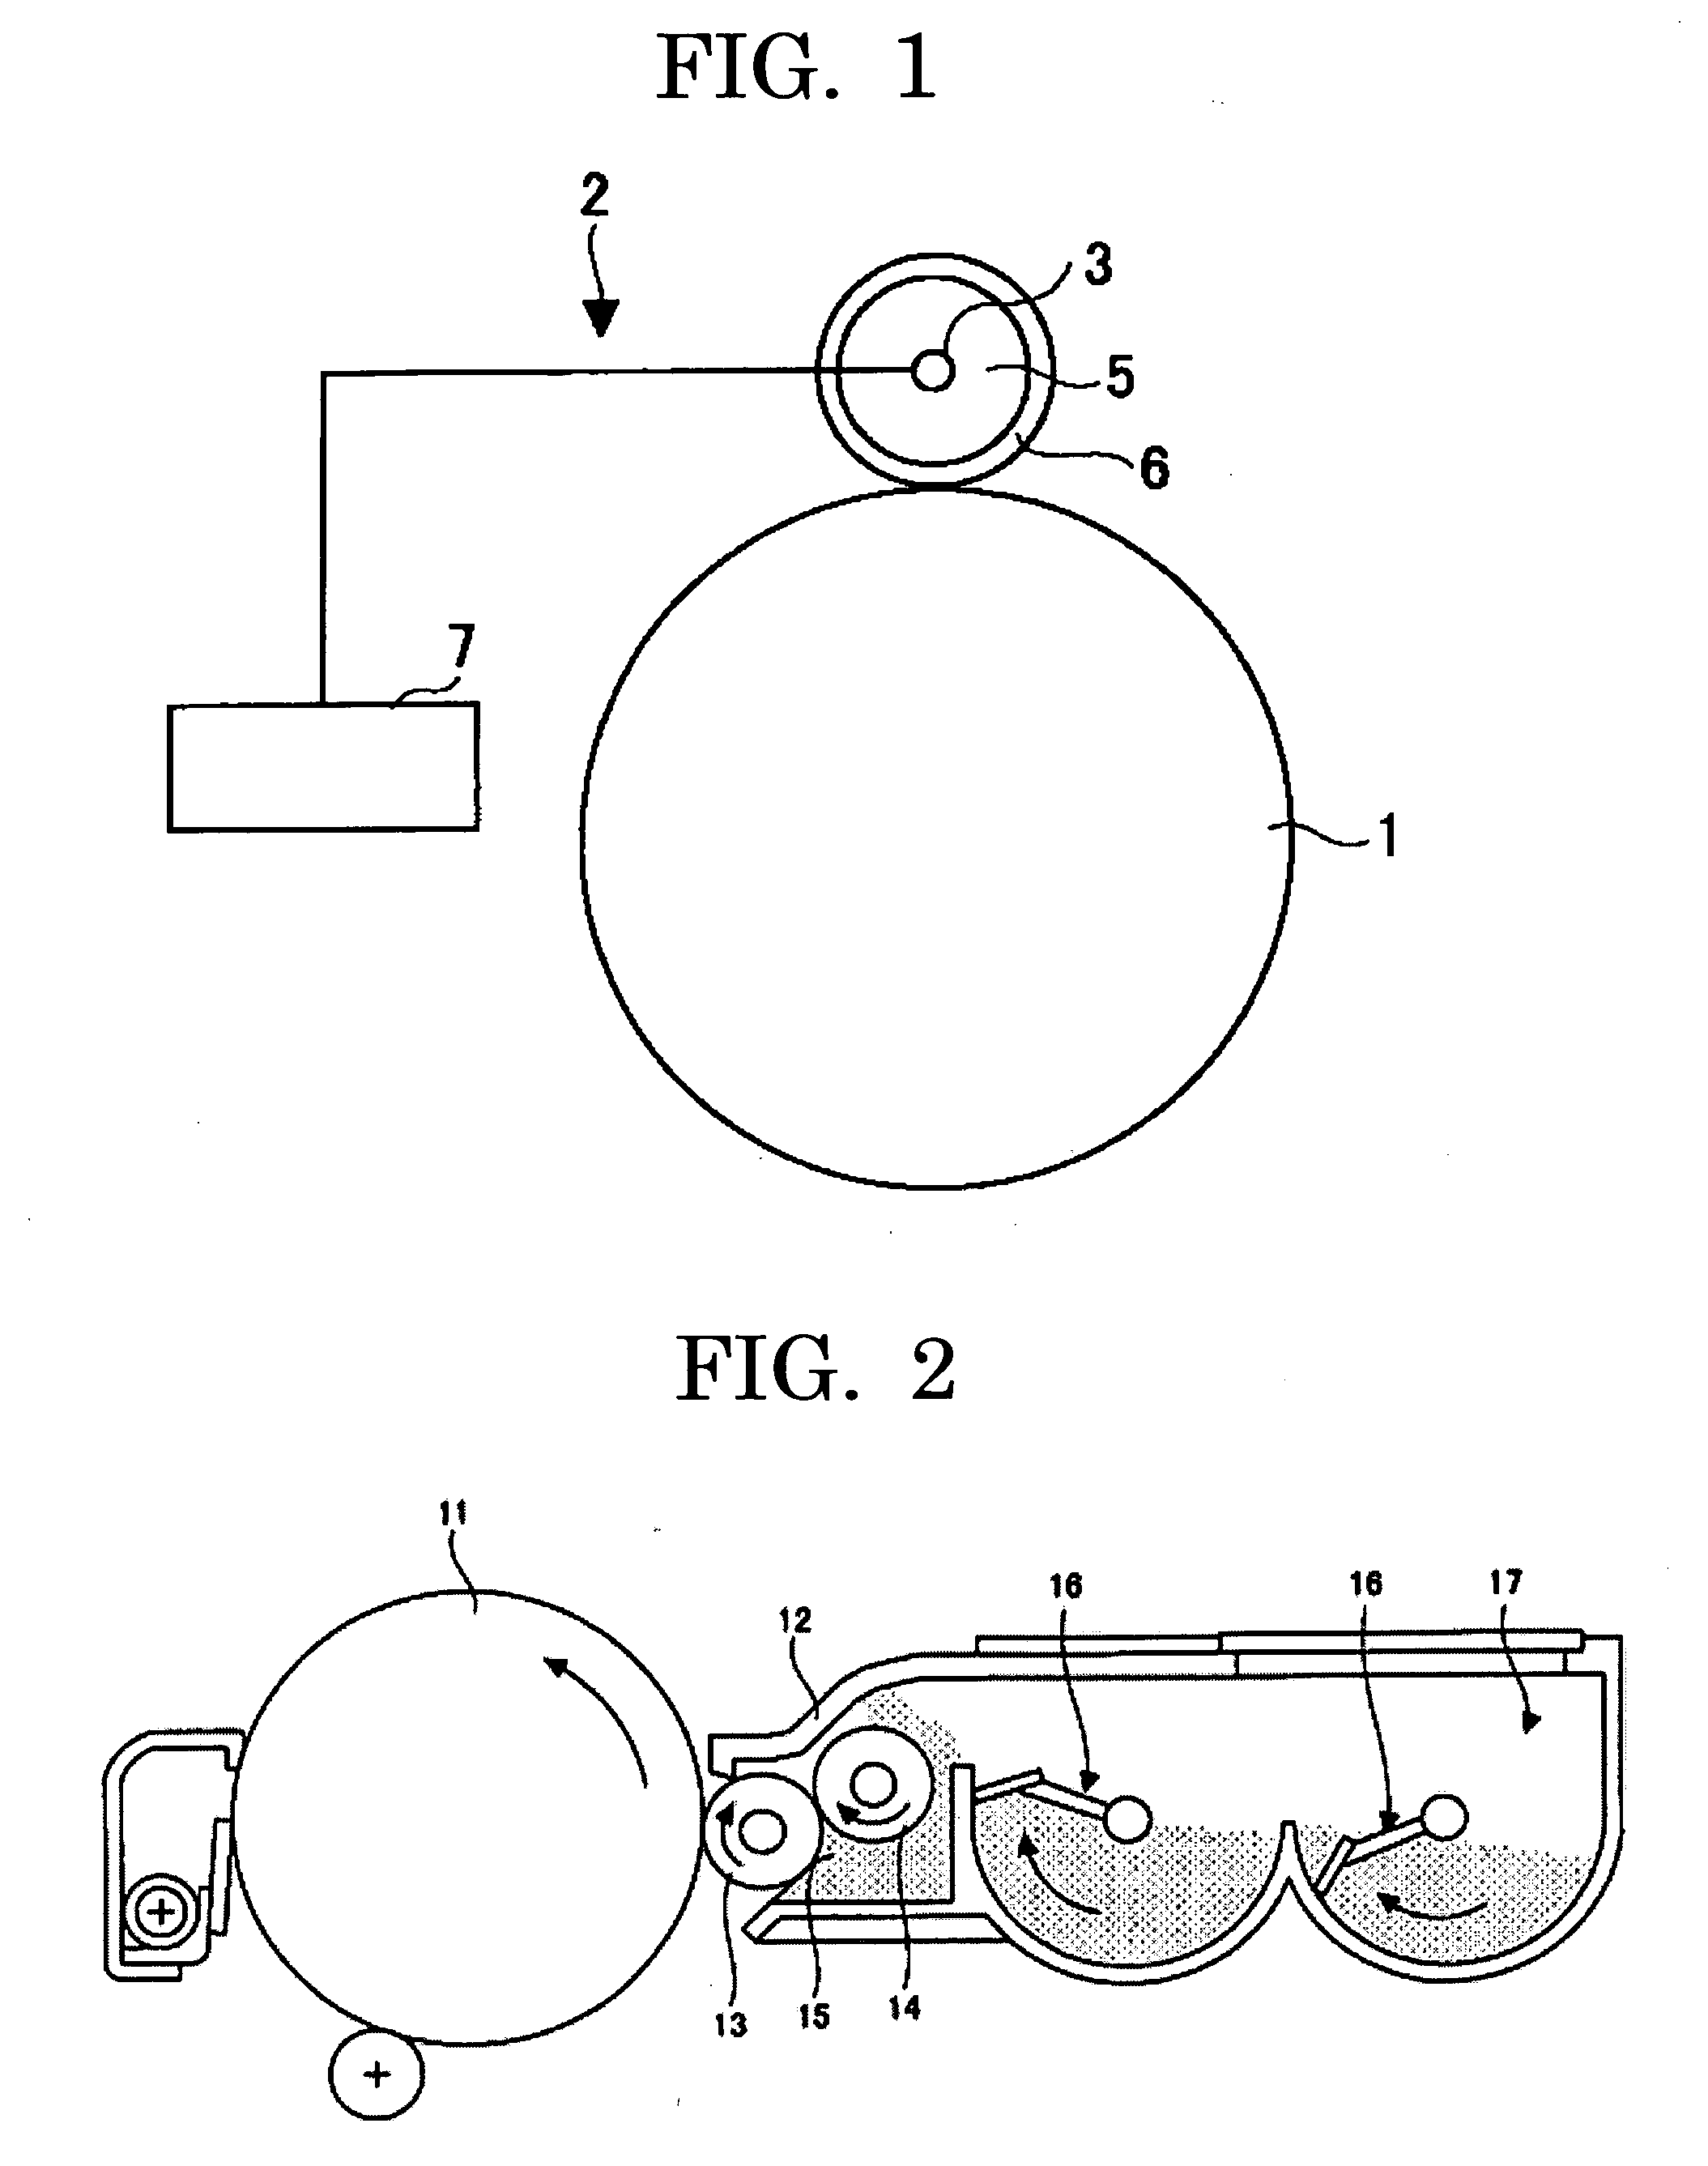 Toner for developing a latent electrostatic image, image-forming method, image-forming apparatus and process cartridge using the same